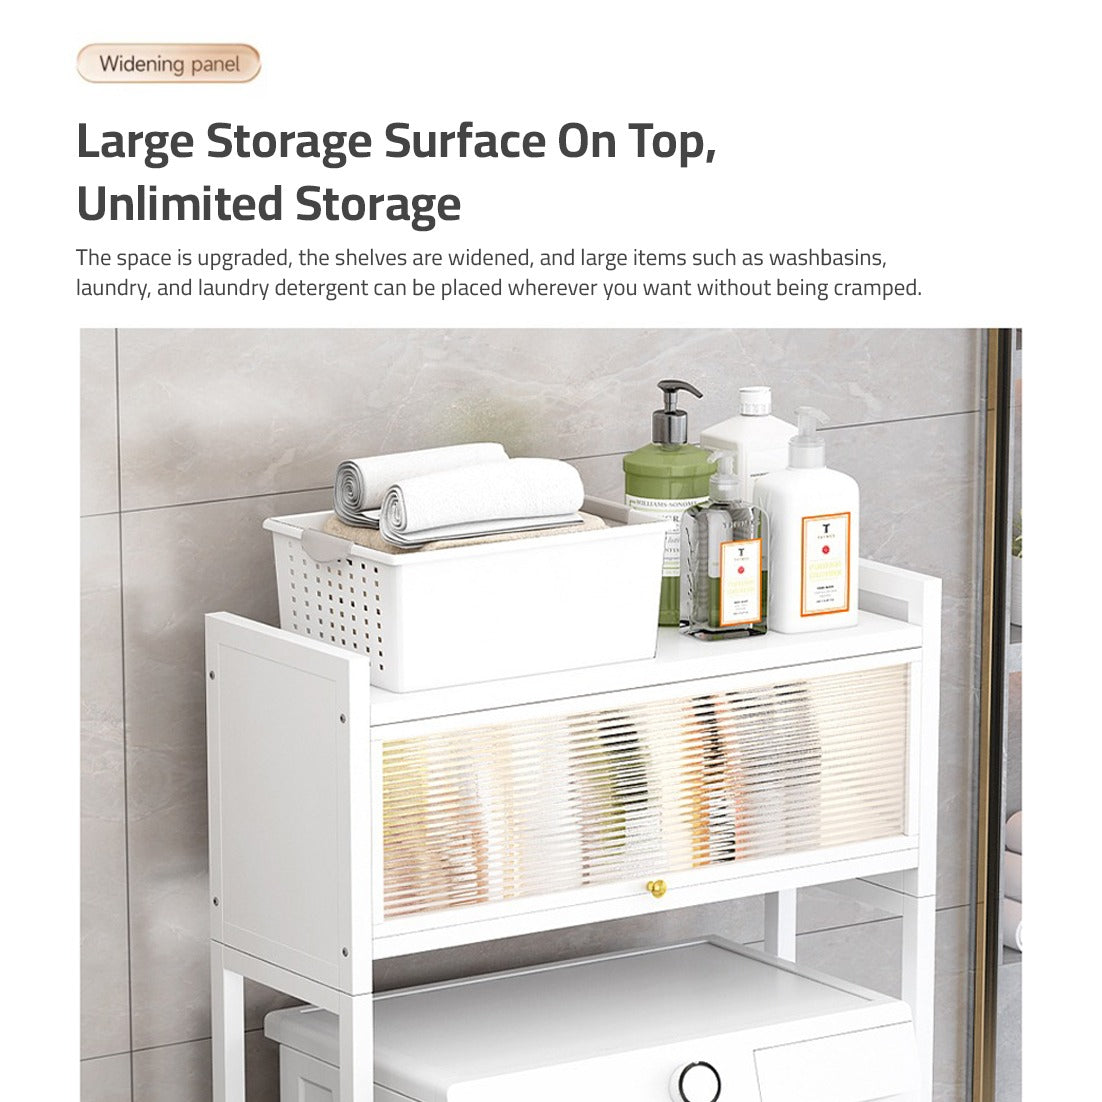 Upper layer of Laundry Room Storage Cabinet Organizer where Laundry Items are Stored.